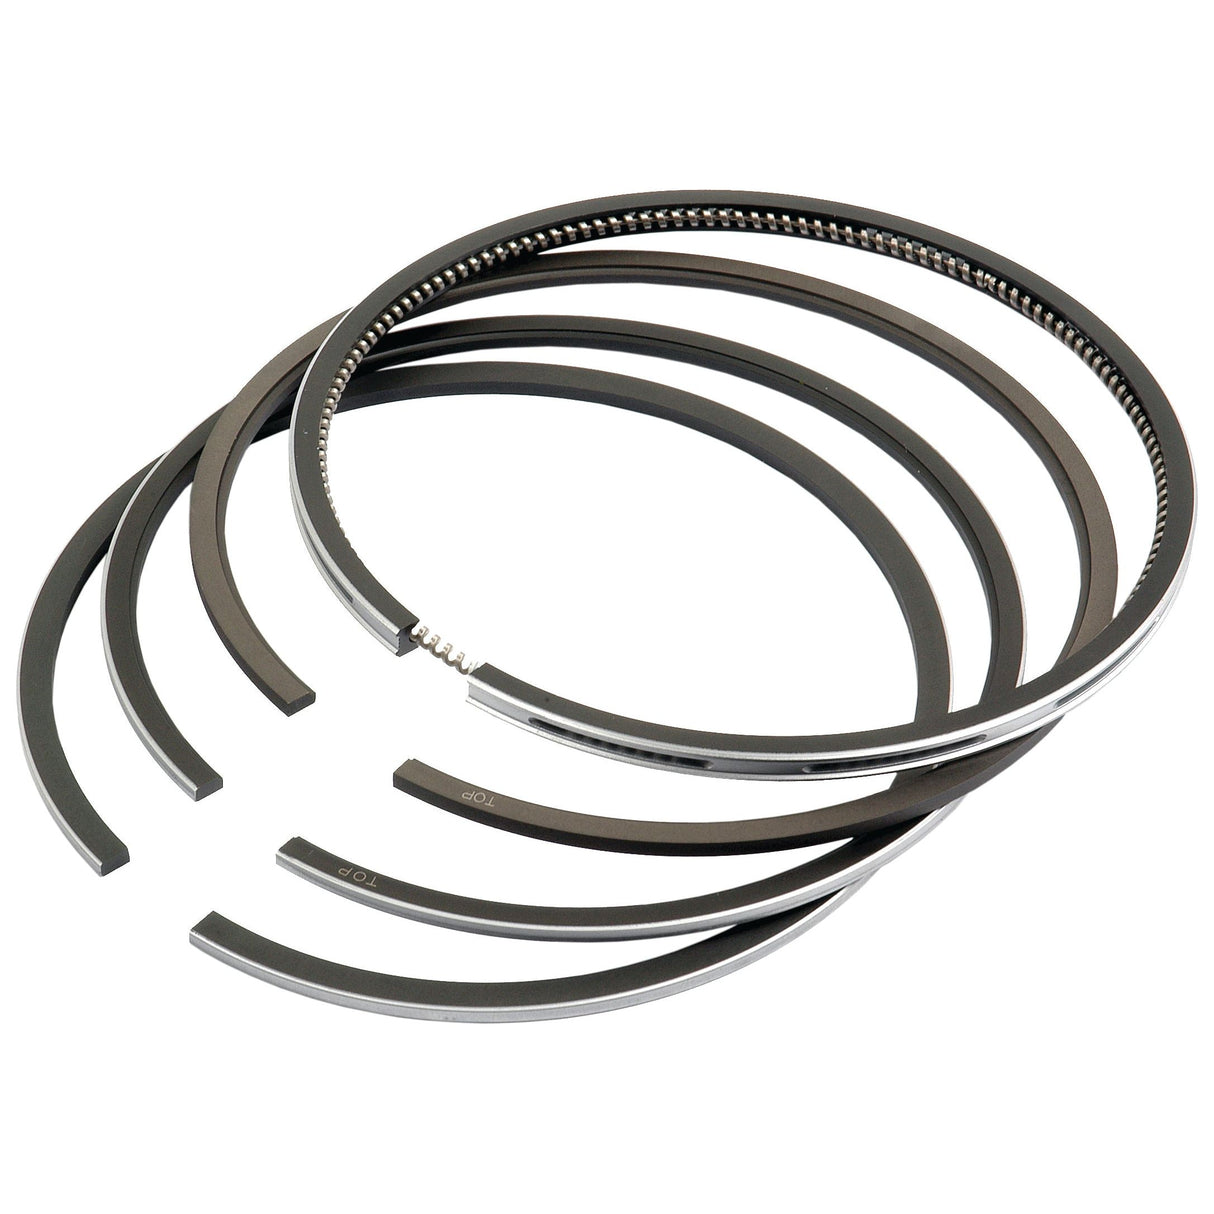 Piston Ring +0.020'' (0.50mm)
 - S.66064 - Massey Tractor Parts